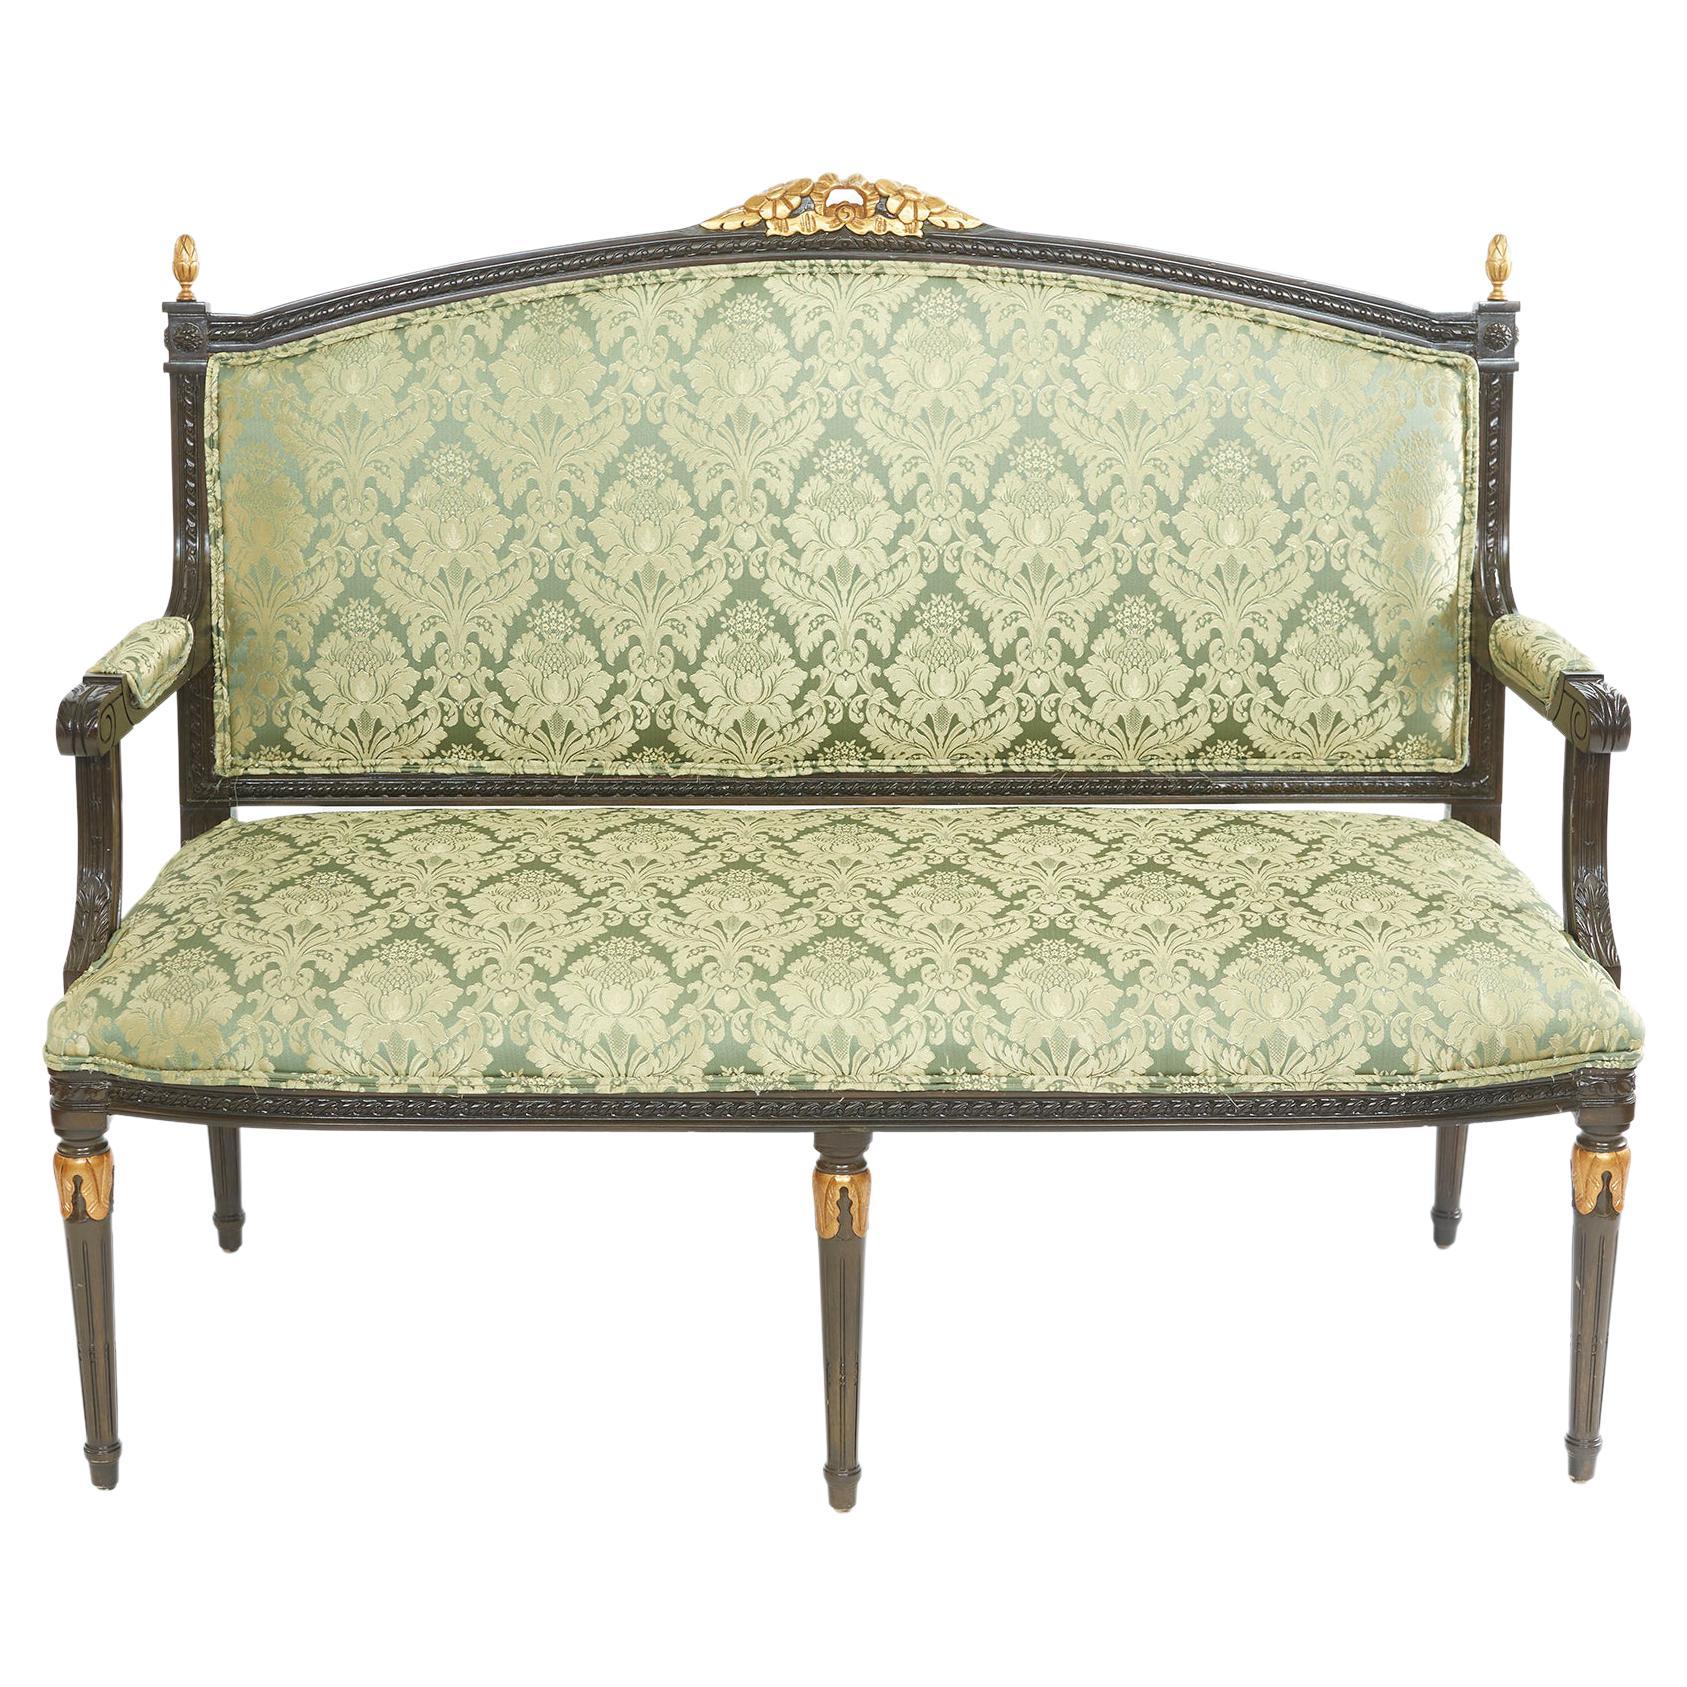 19th Century Painted / Giltwood Framed Settee For Sale